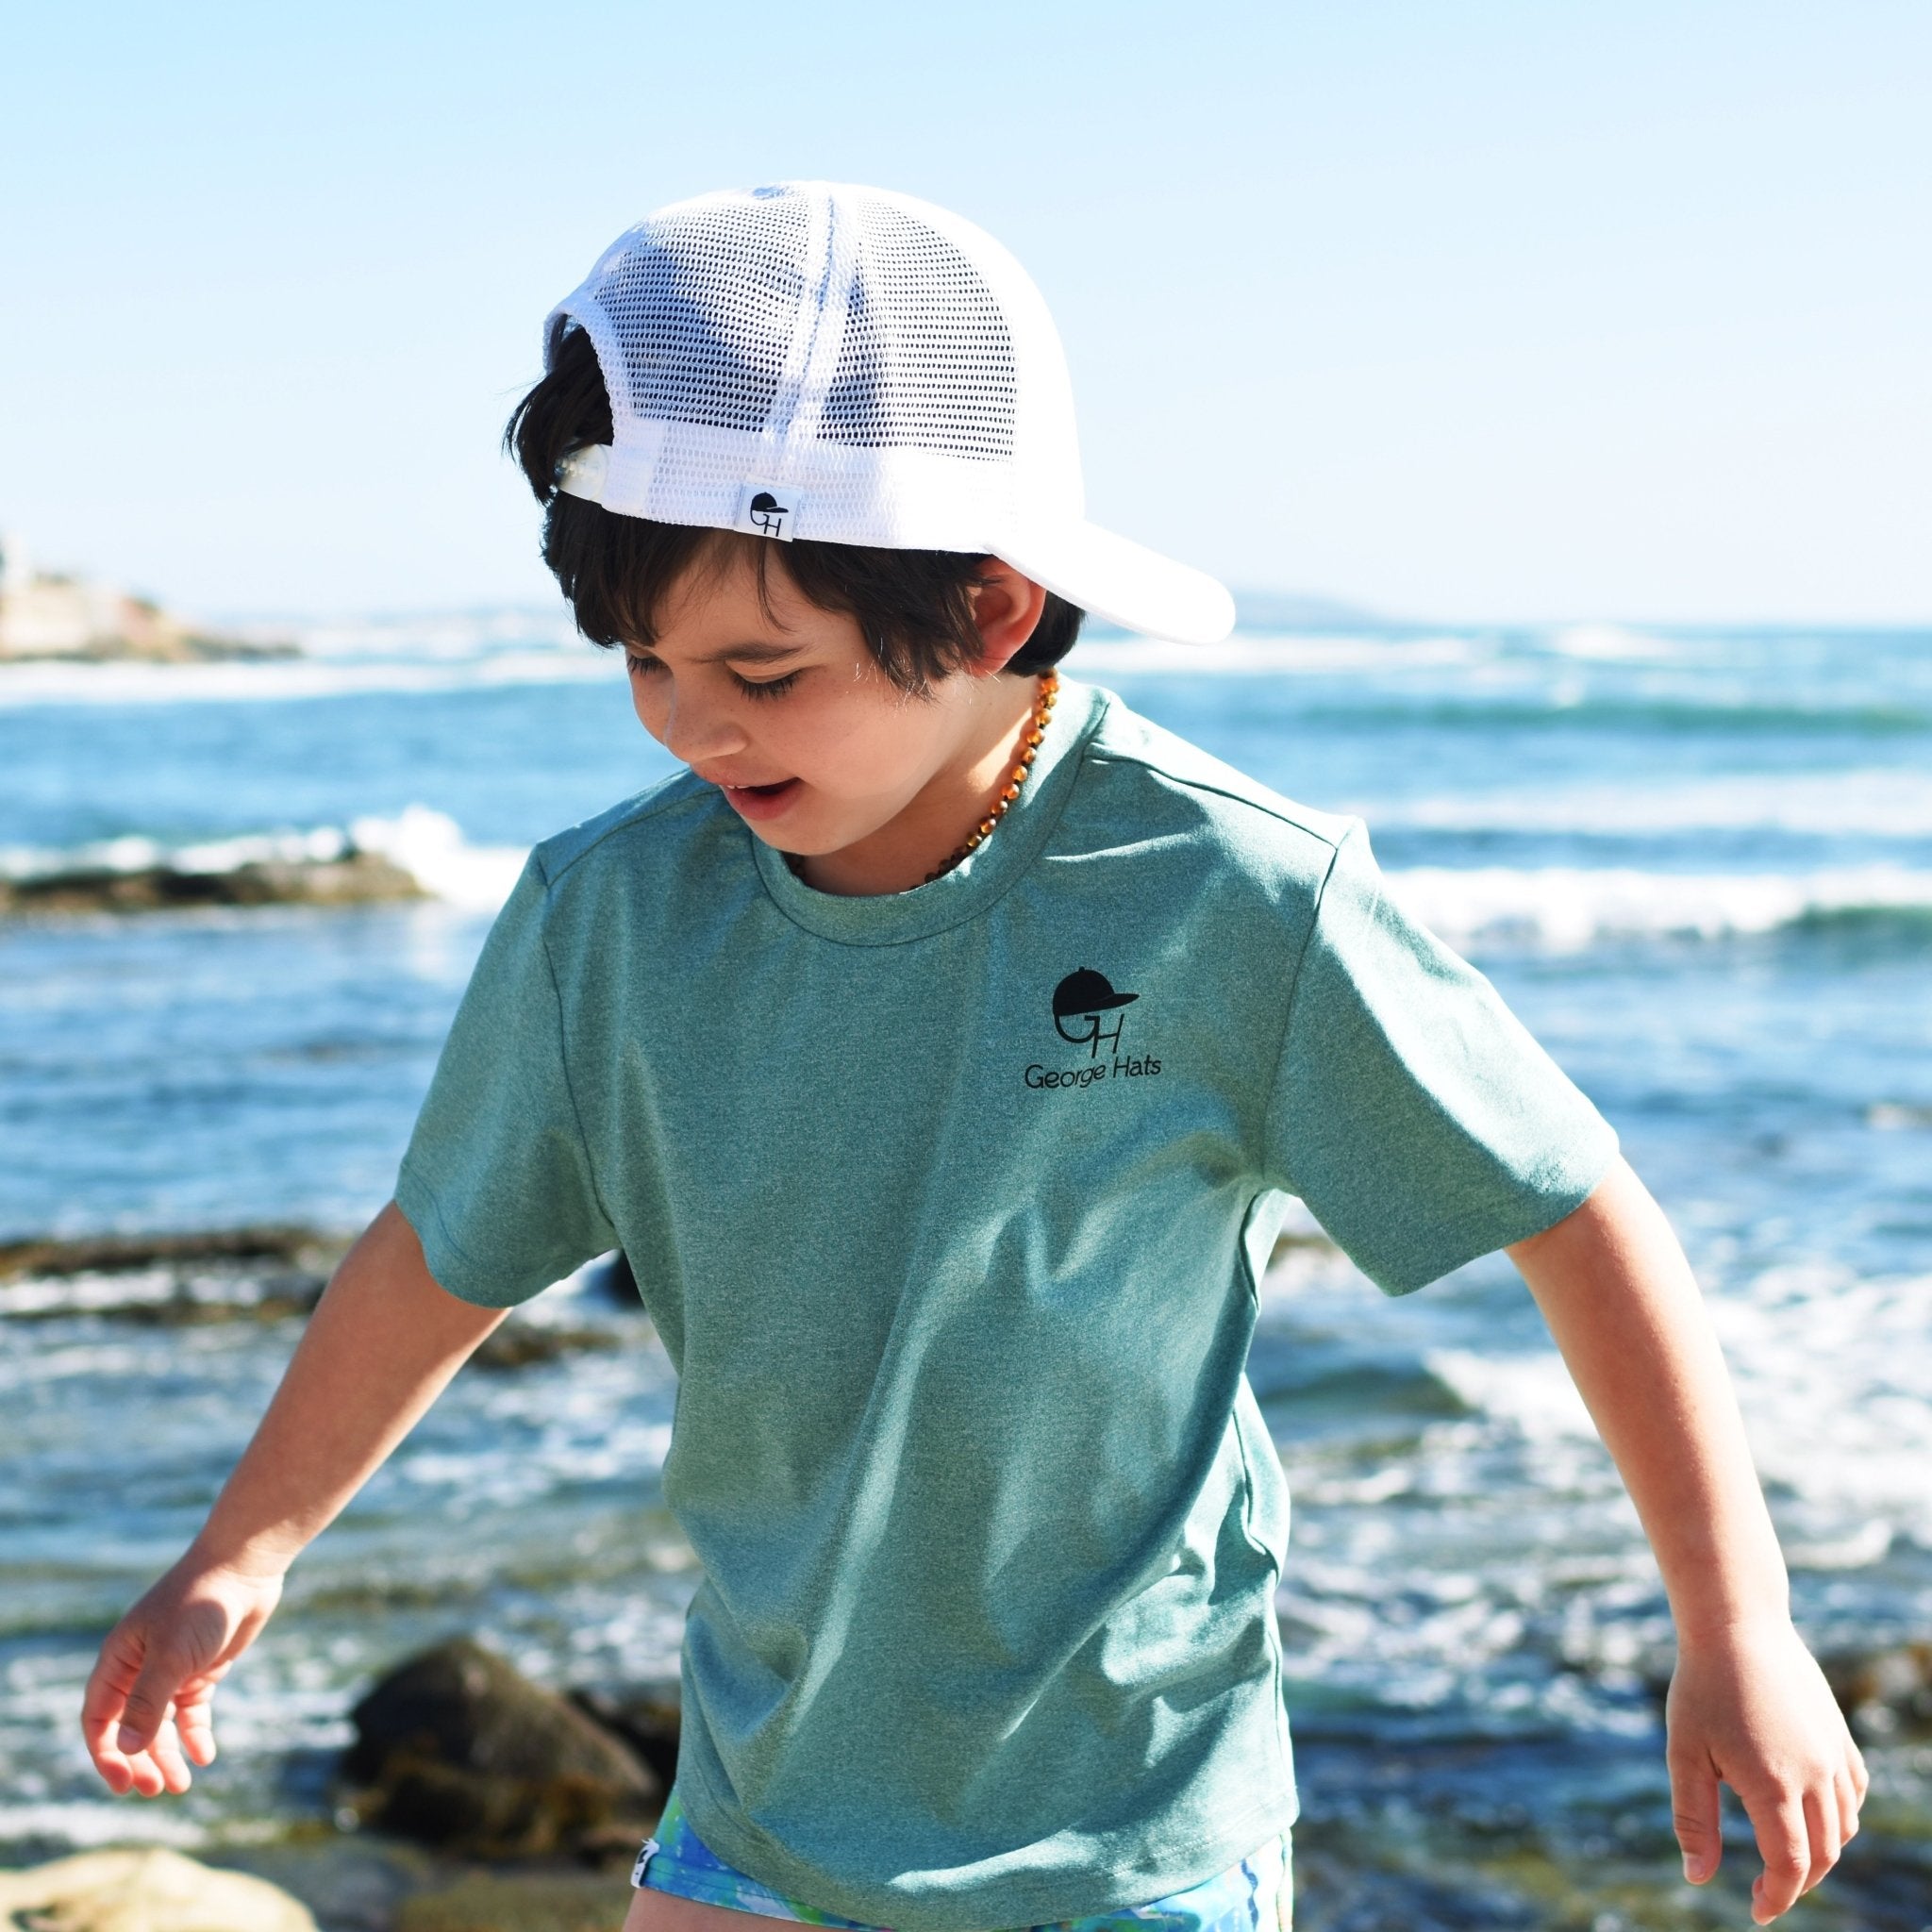 Image of child wearing a George Hats Sun Shirt.